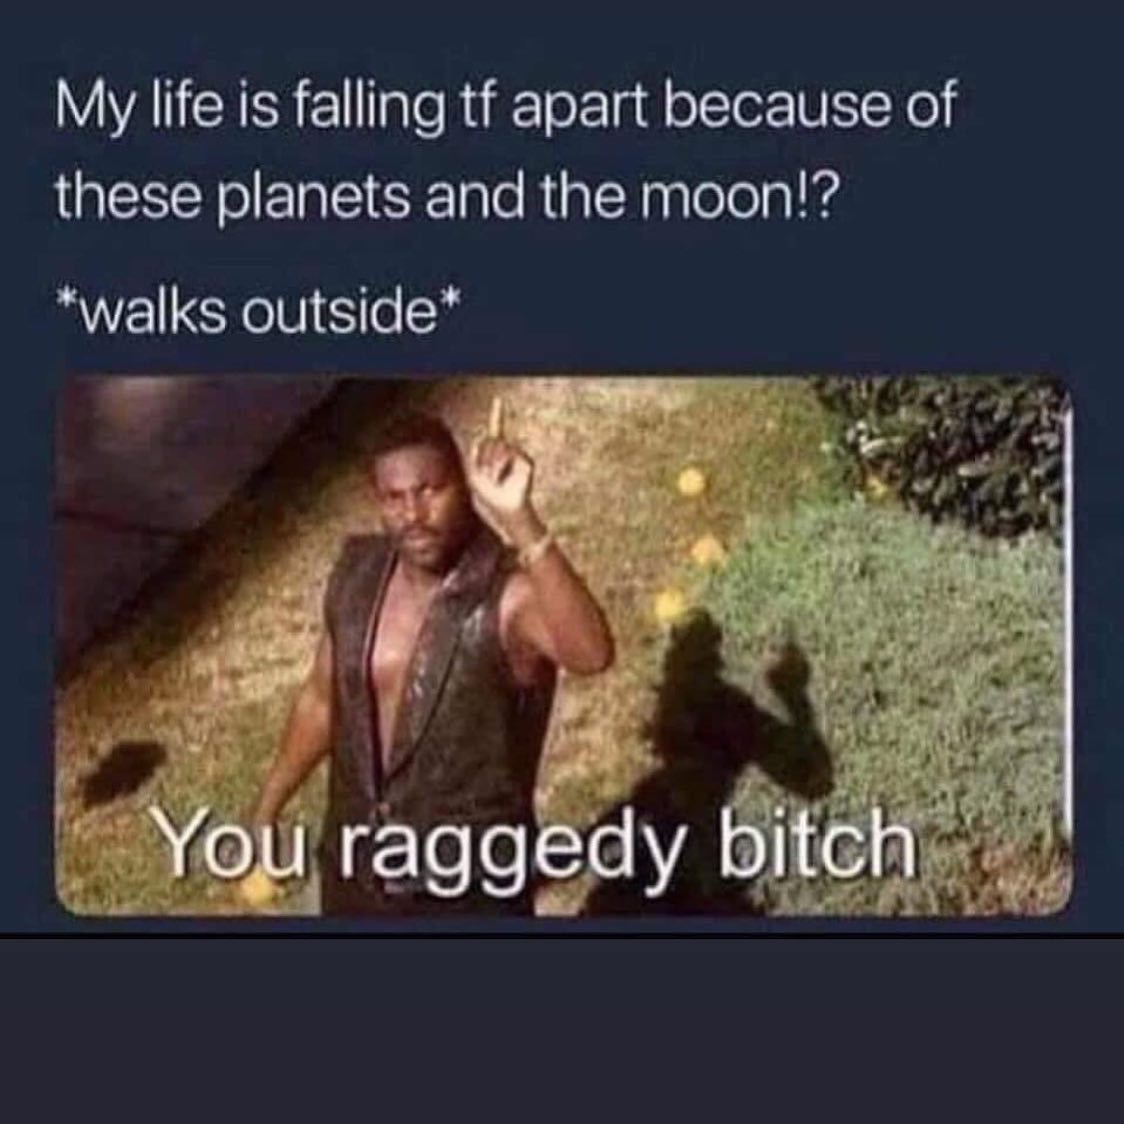 you raggedy bitch meme - My life is falling tf apart because of these planets and the moon!? walks outside You raggedy bitch